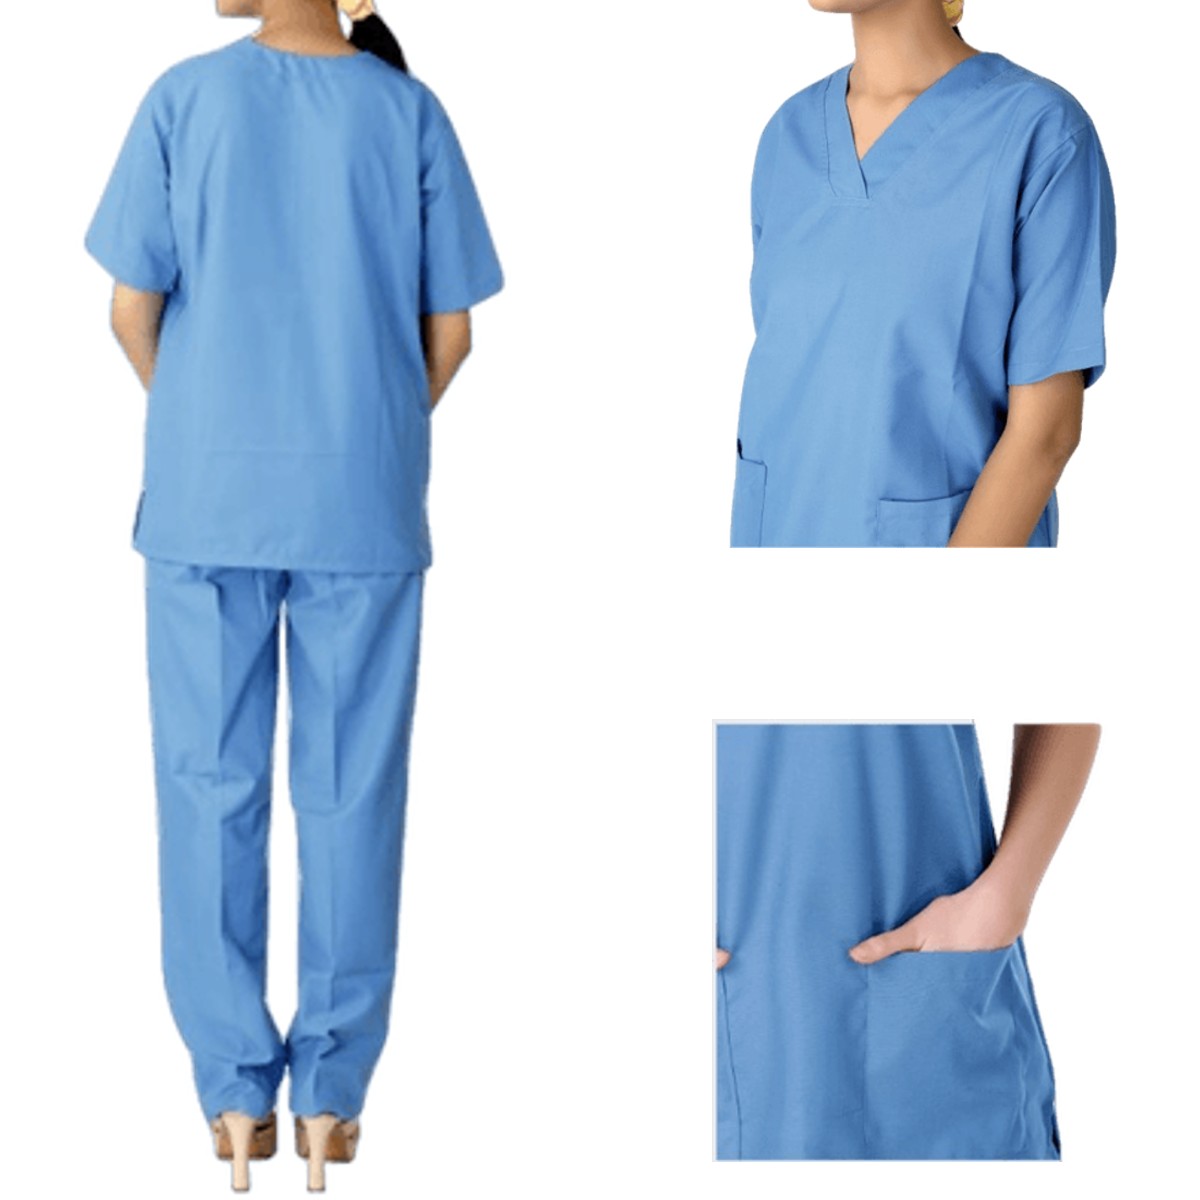 Customized EO Sterile Reinforced Surgical Gowns Lwm tus neeg, Manufacturers  - Hoobkas Direct Lag luam wholesale - MEDLINK